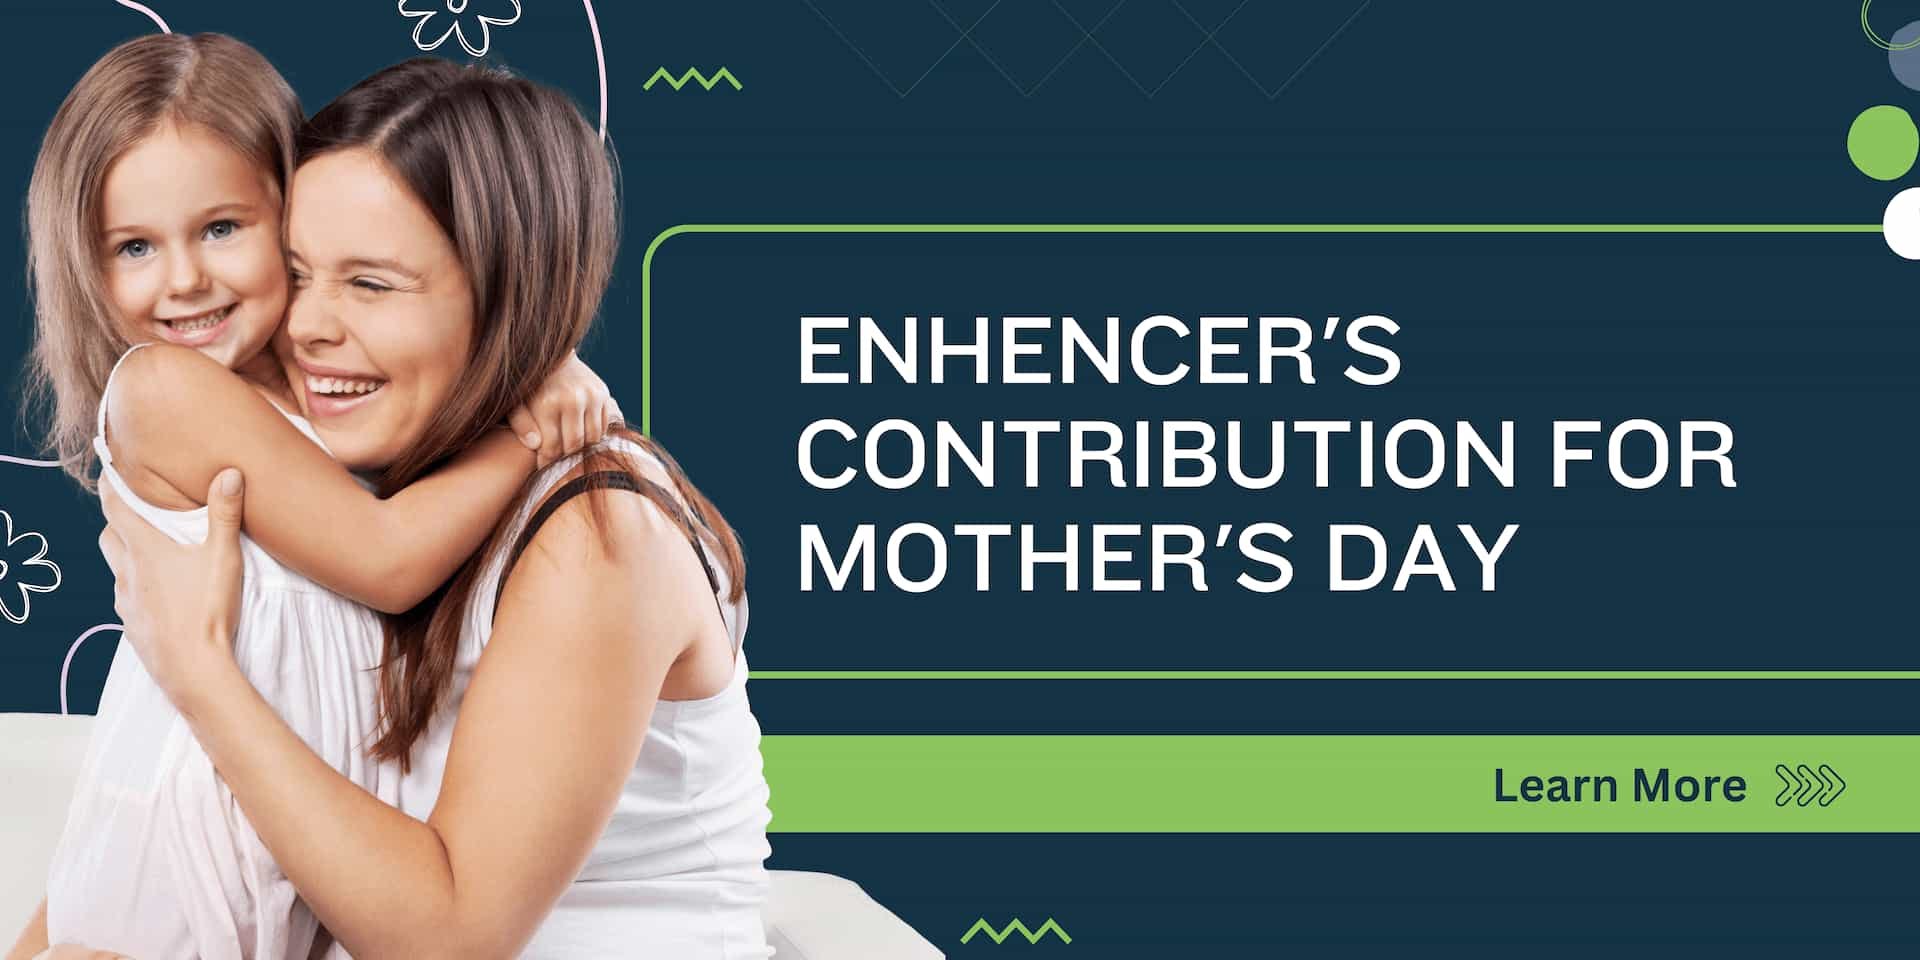 Enhencer's Contribution to E-commerce During Mother's Day